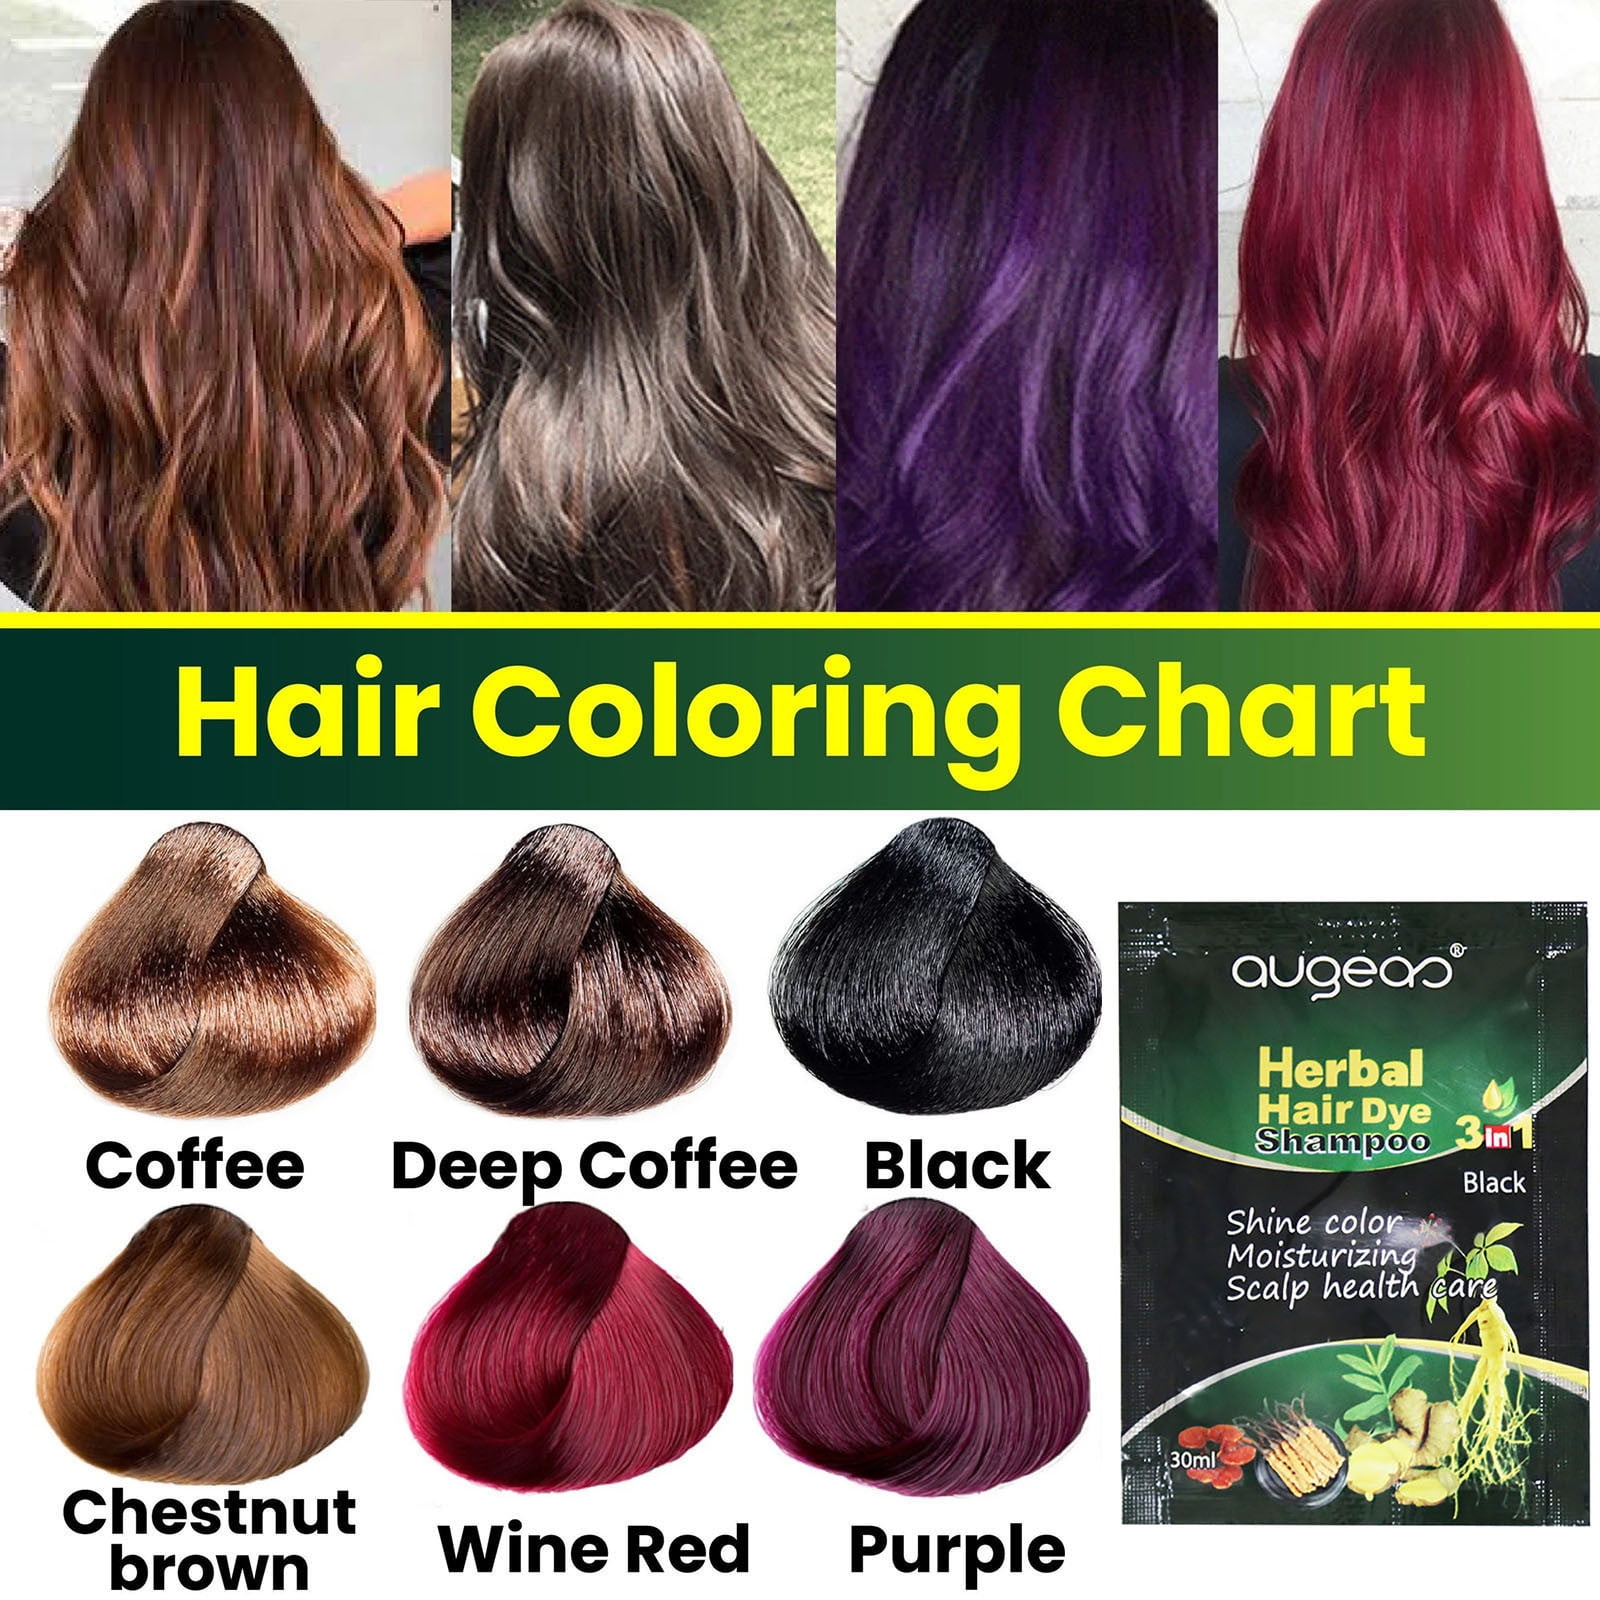 Buy Green Herbs Natural Fruit Extract Healthy Hair Dye Hair Color (Black)  1000 ml Online at Low Prices in India - Amazon.in